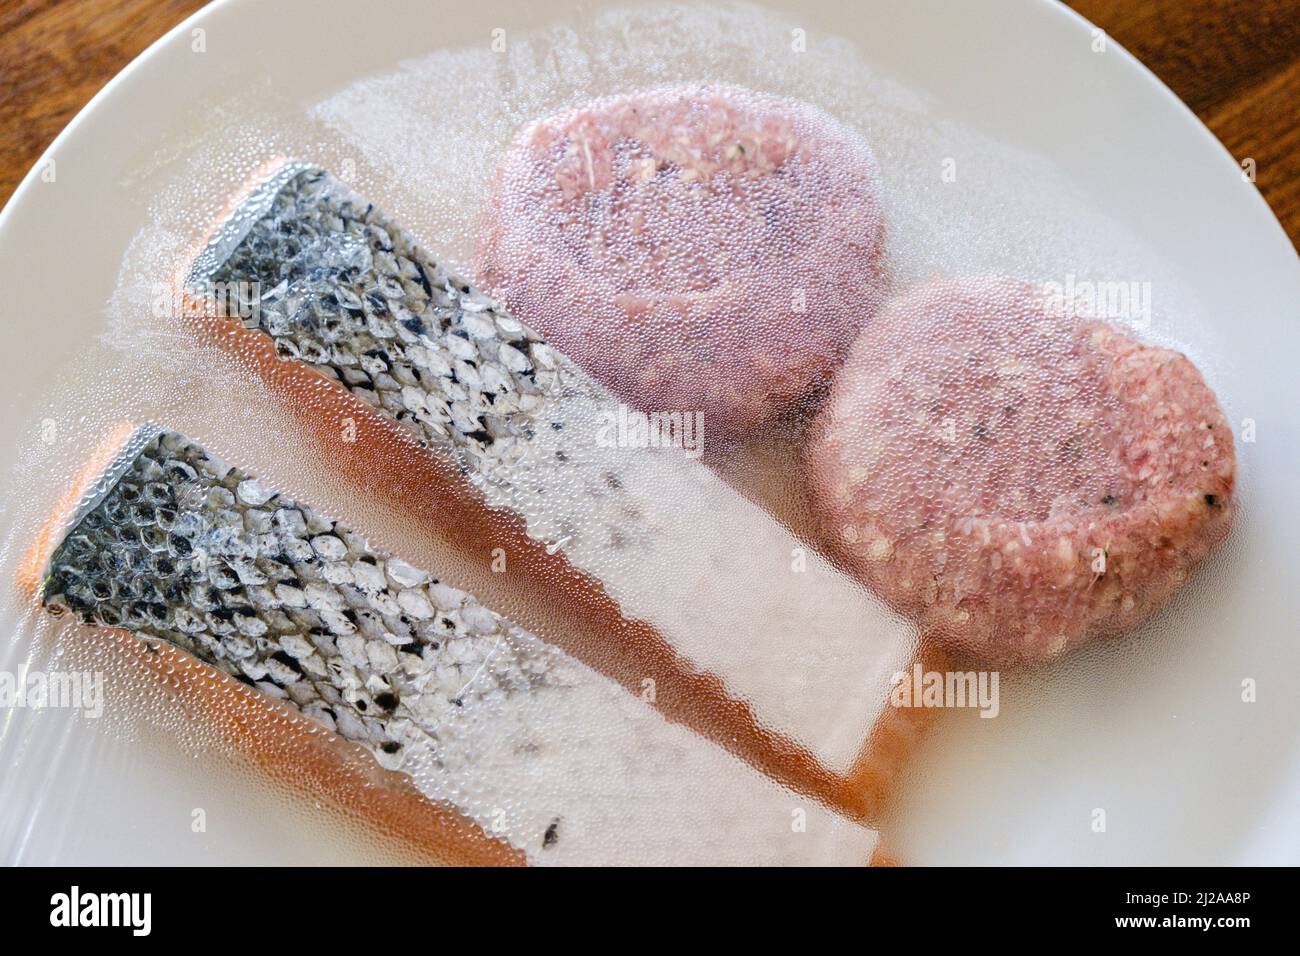 A plate of uncooked food, inclduing salmon fillets and beef burgers ready for a barbecue. Stock Photo